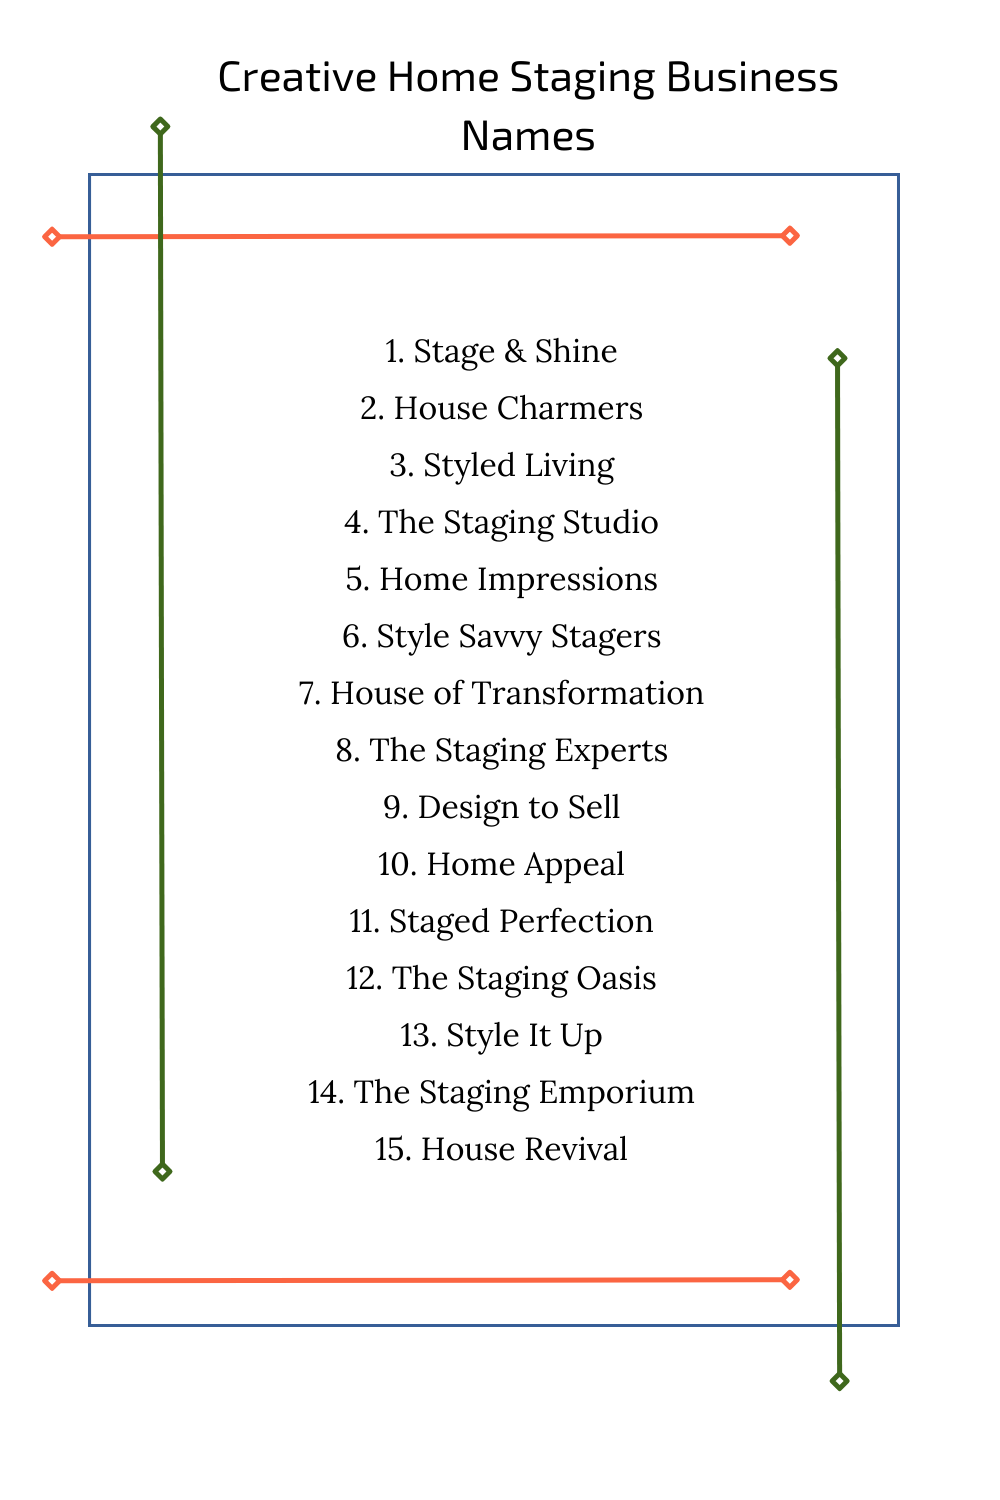 Creative Home Staging Business Names